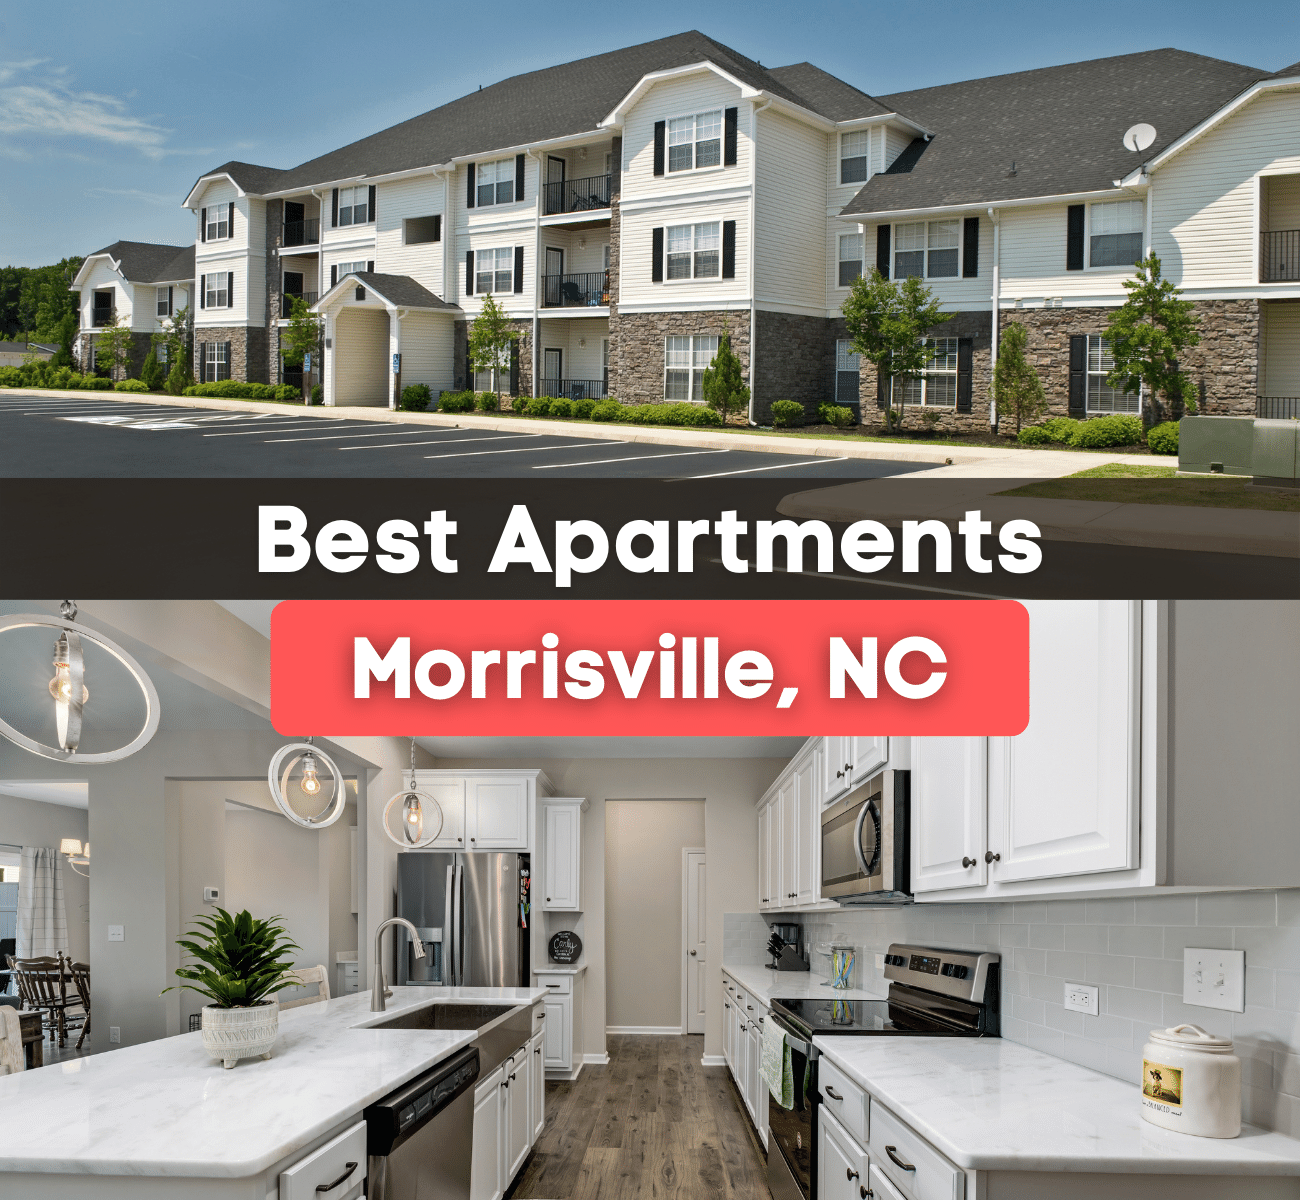 7 Best Apartments in Morrisville, NC